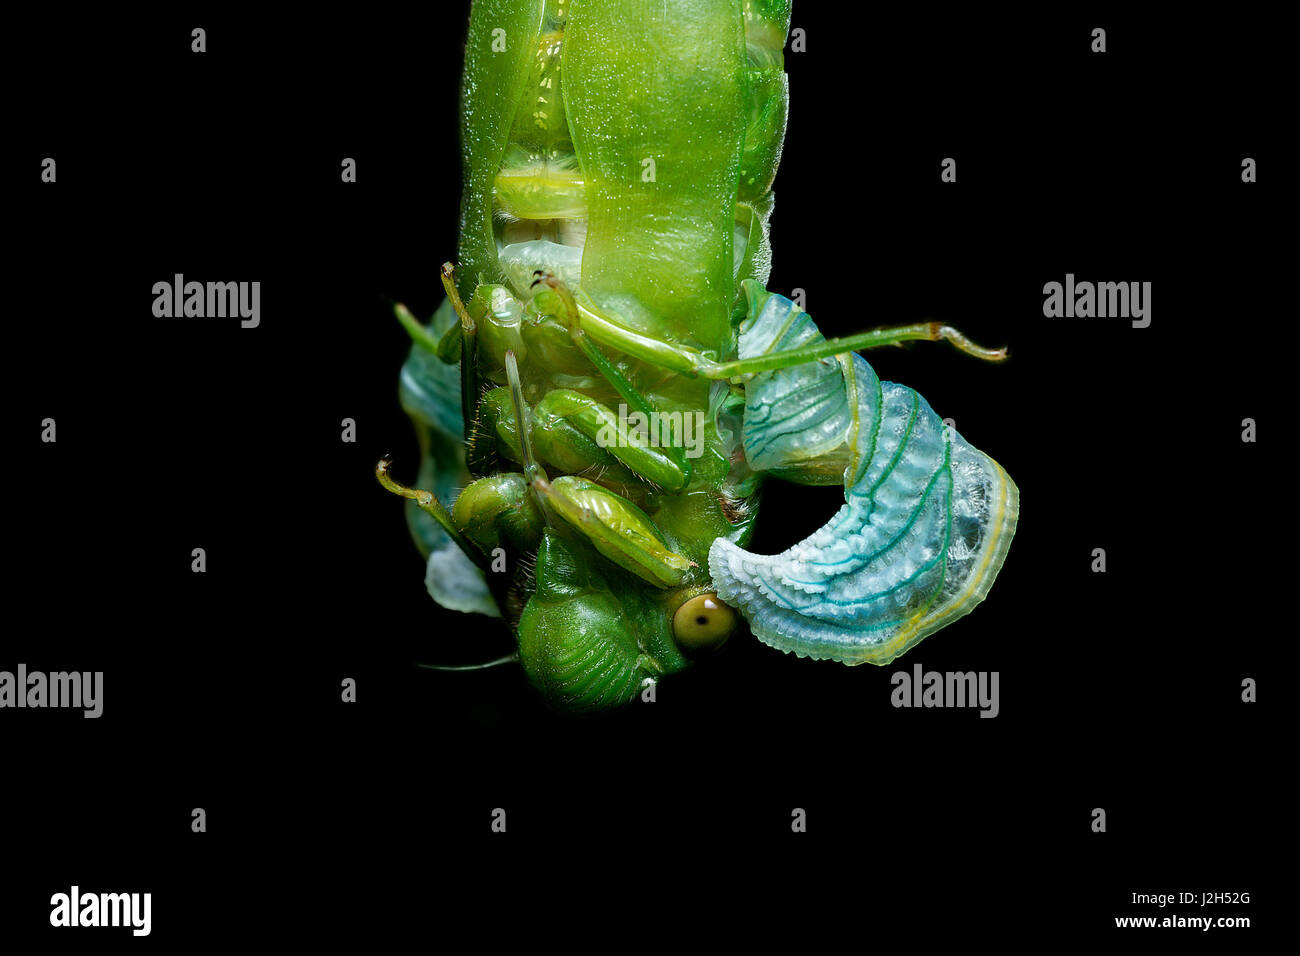 Jade Green Cicada (Dundubia vaginata). Close-up of freshly emerged imago articulating rear leg. Its wings are still compressed into larval wing buds. Stock Photo